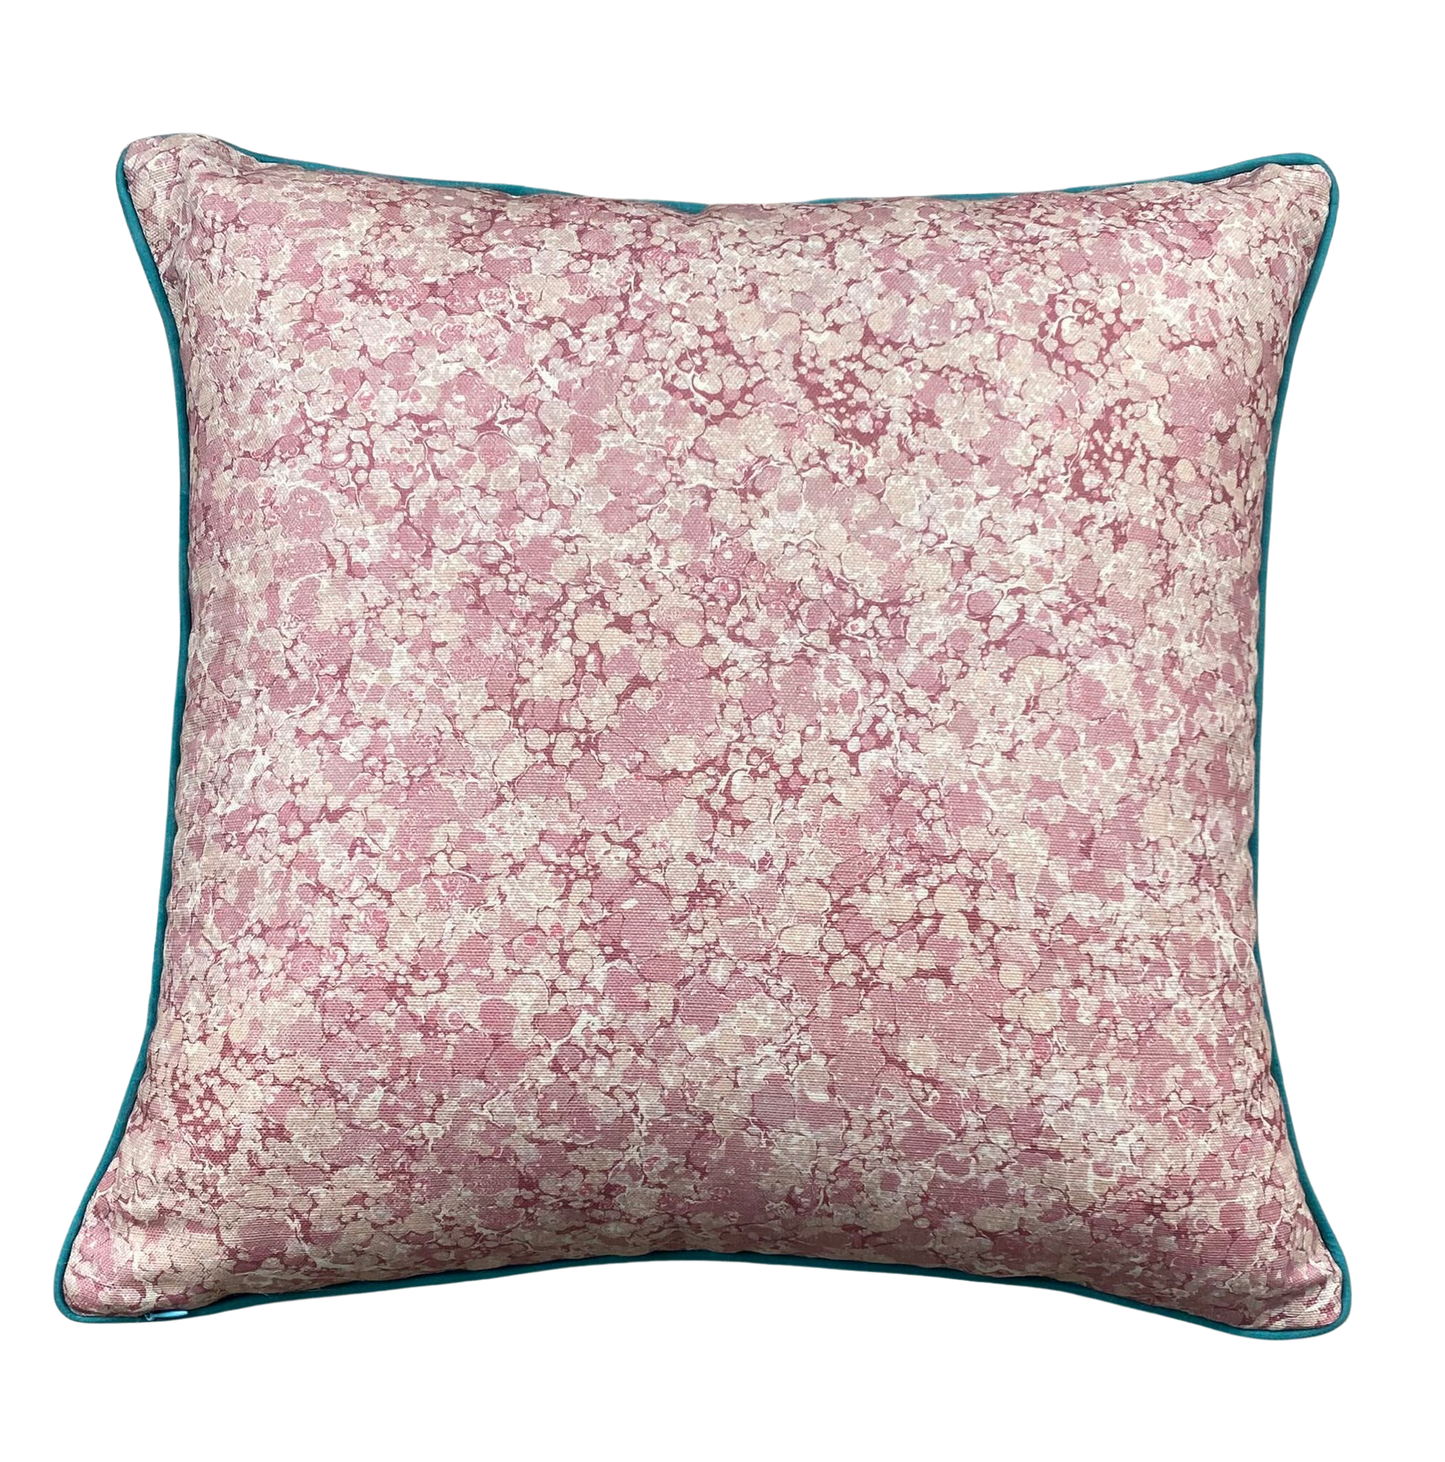 House of Amitié Linen Cushion Cover - Serpentine Spring & Ditzy Eglantine